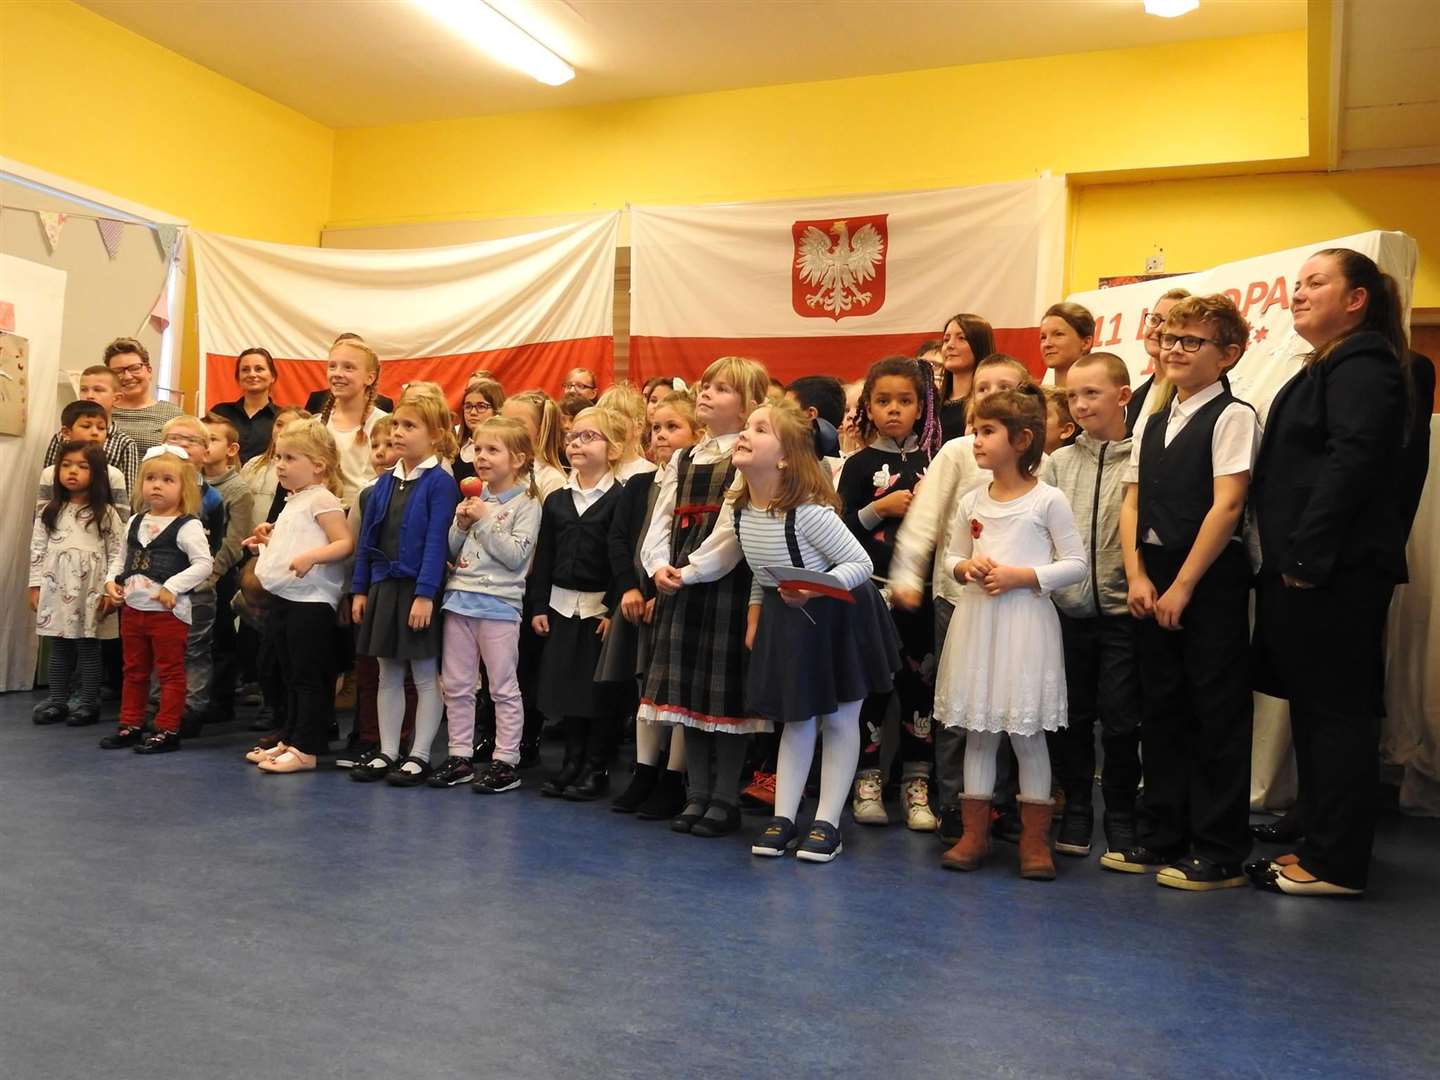 The Polish School in Inverness offers children the opportunity to discover their heritage.  Image: Polska Szkola Sobotnia